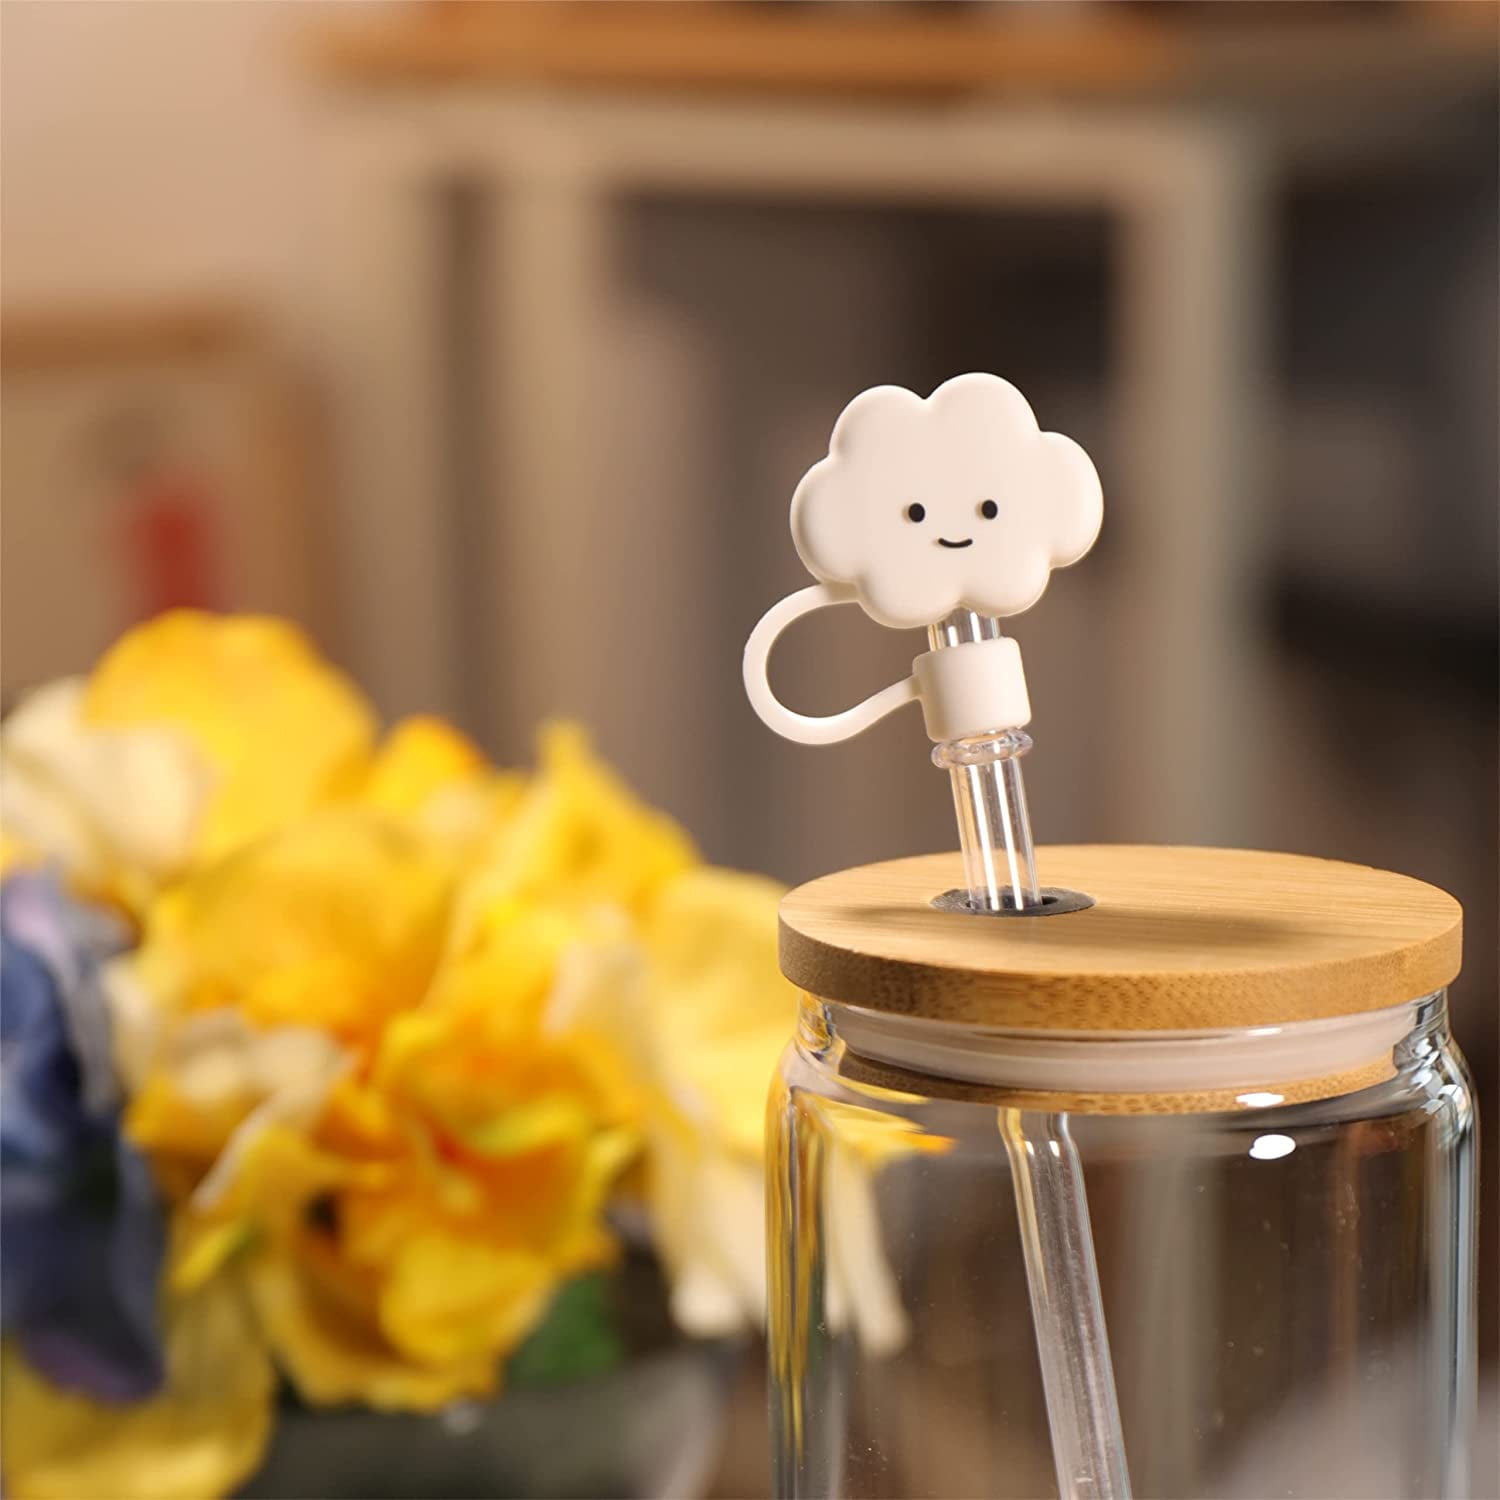 Cloud Straw Cover, Straw Covers Cap For Reusable Straws, Silicone Straw Tip Covers  Cute Anti-dust,splash Proof Reusable Drinking Lid